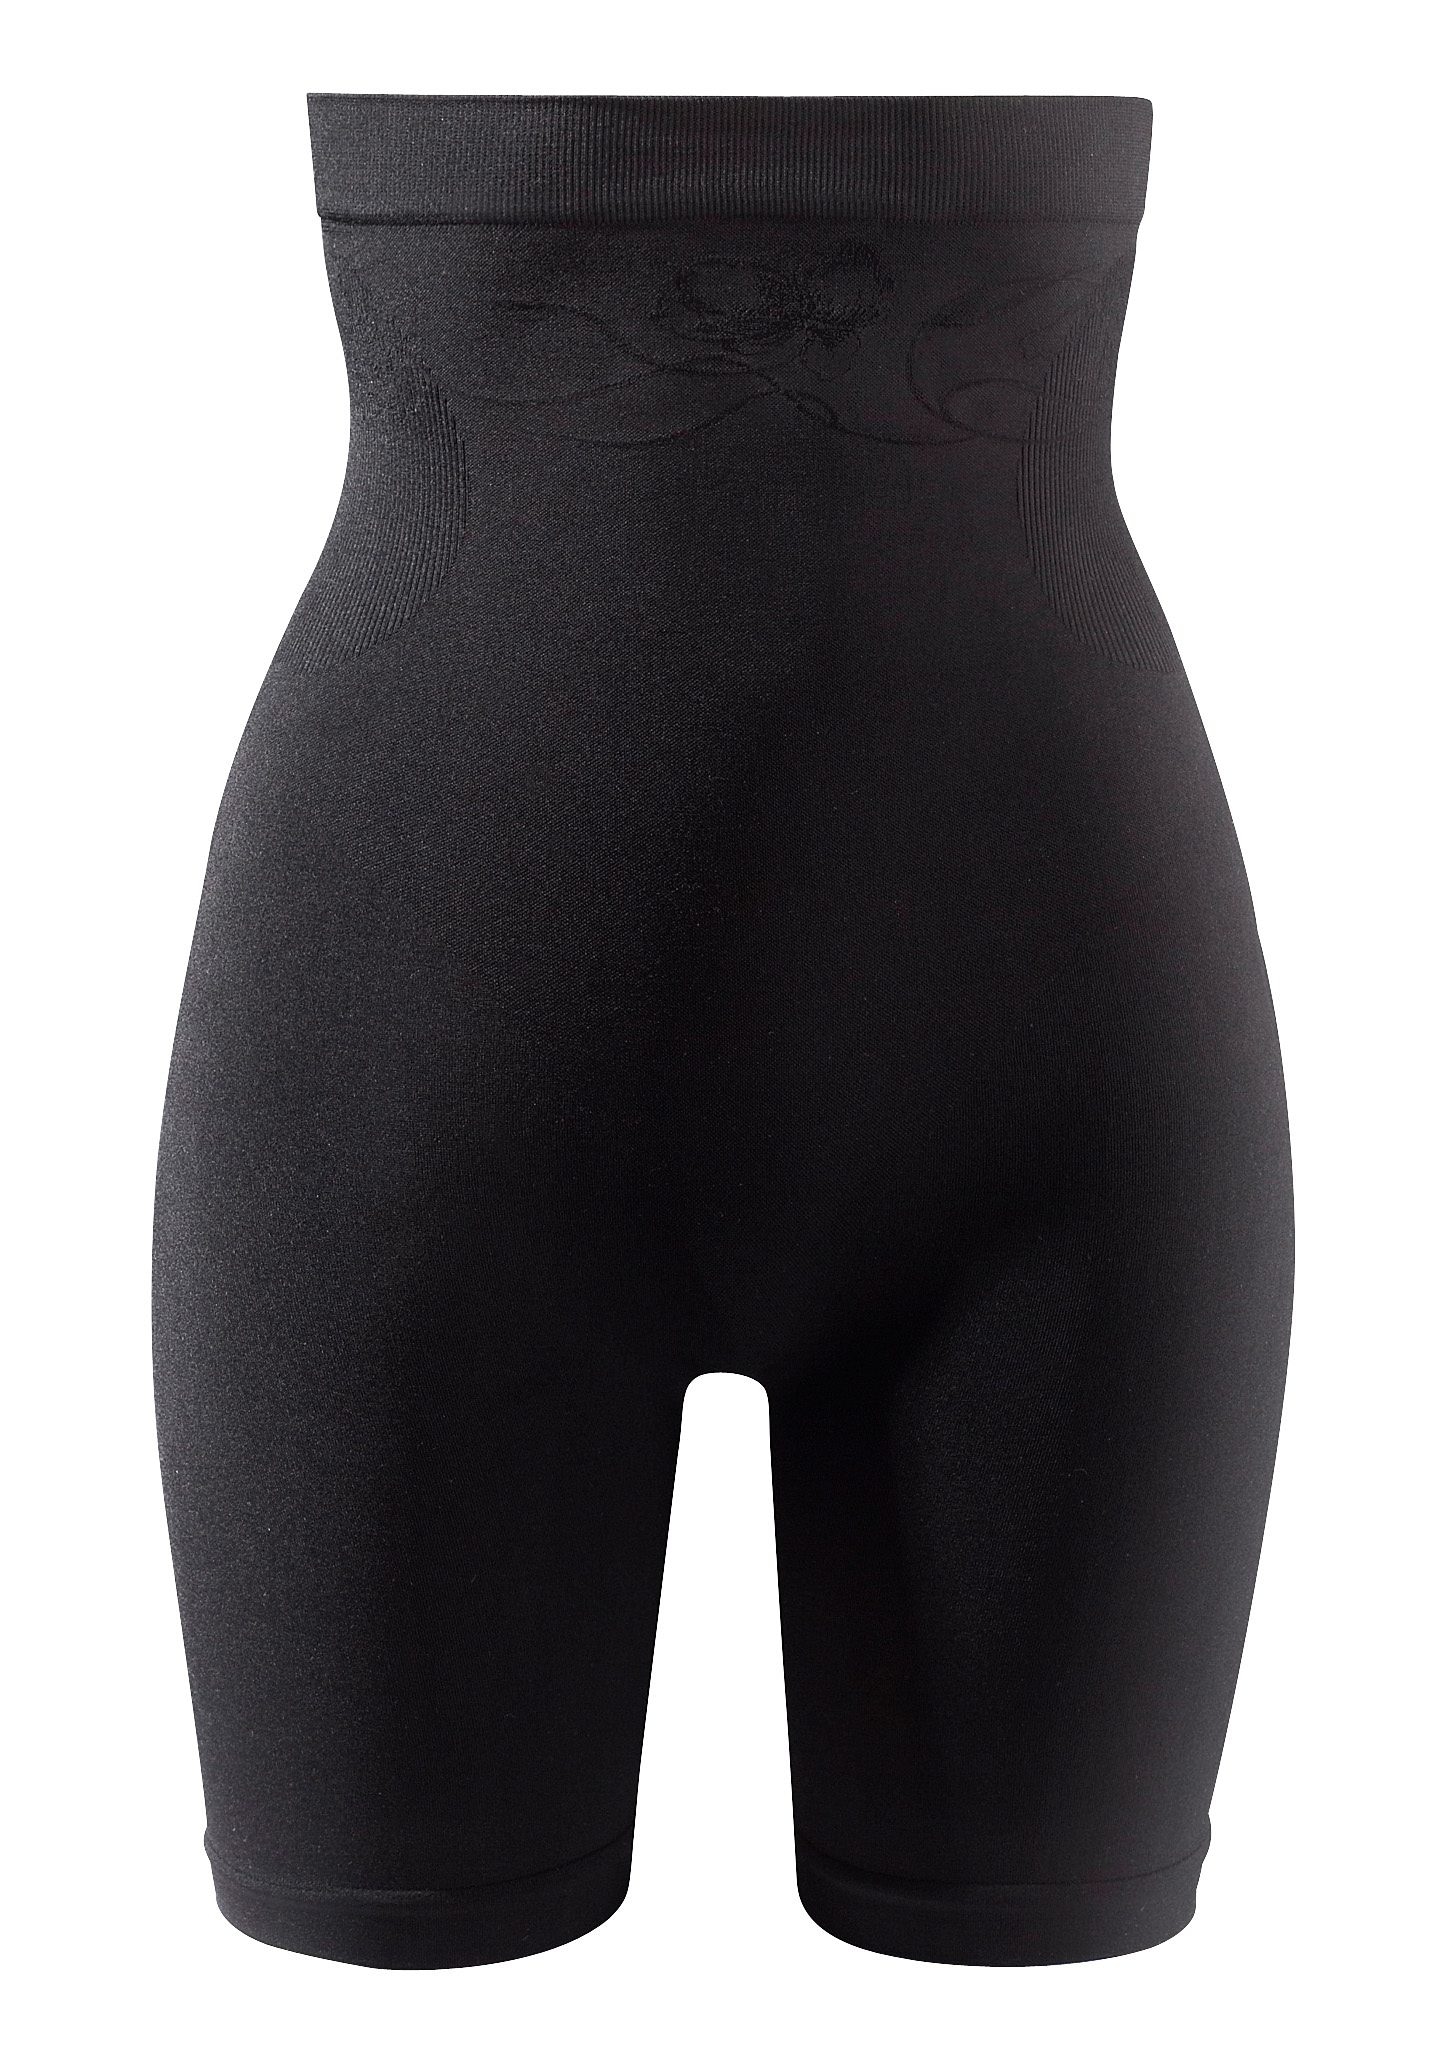 Basic mit confortablement Taille, Dessous Commander hoher Shapinghose, LASCANA SEAMLESS